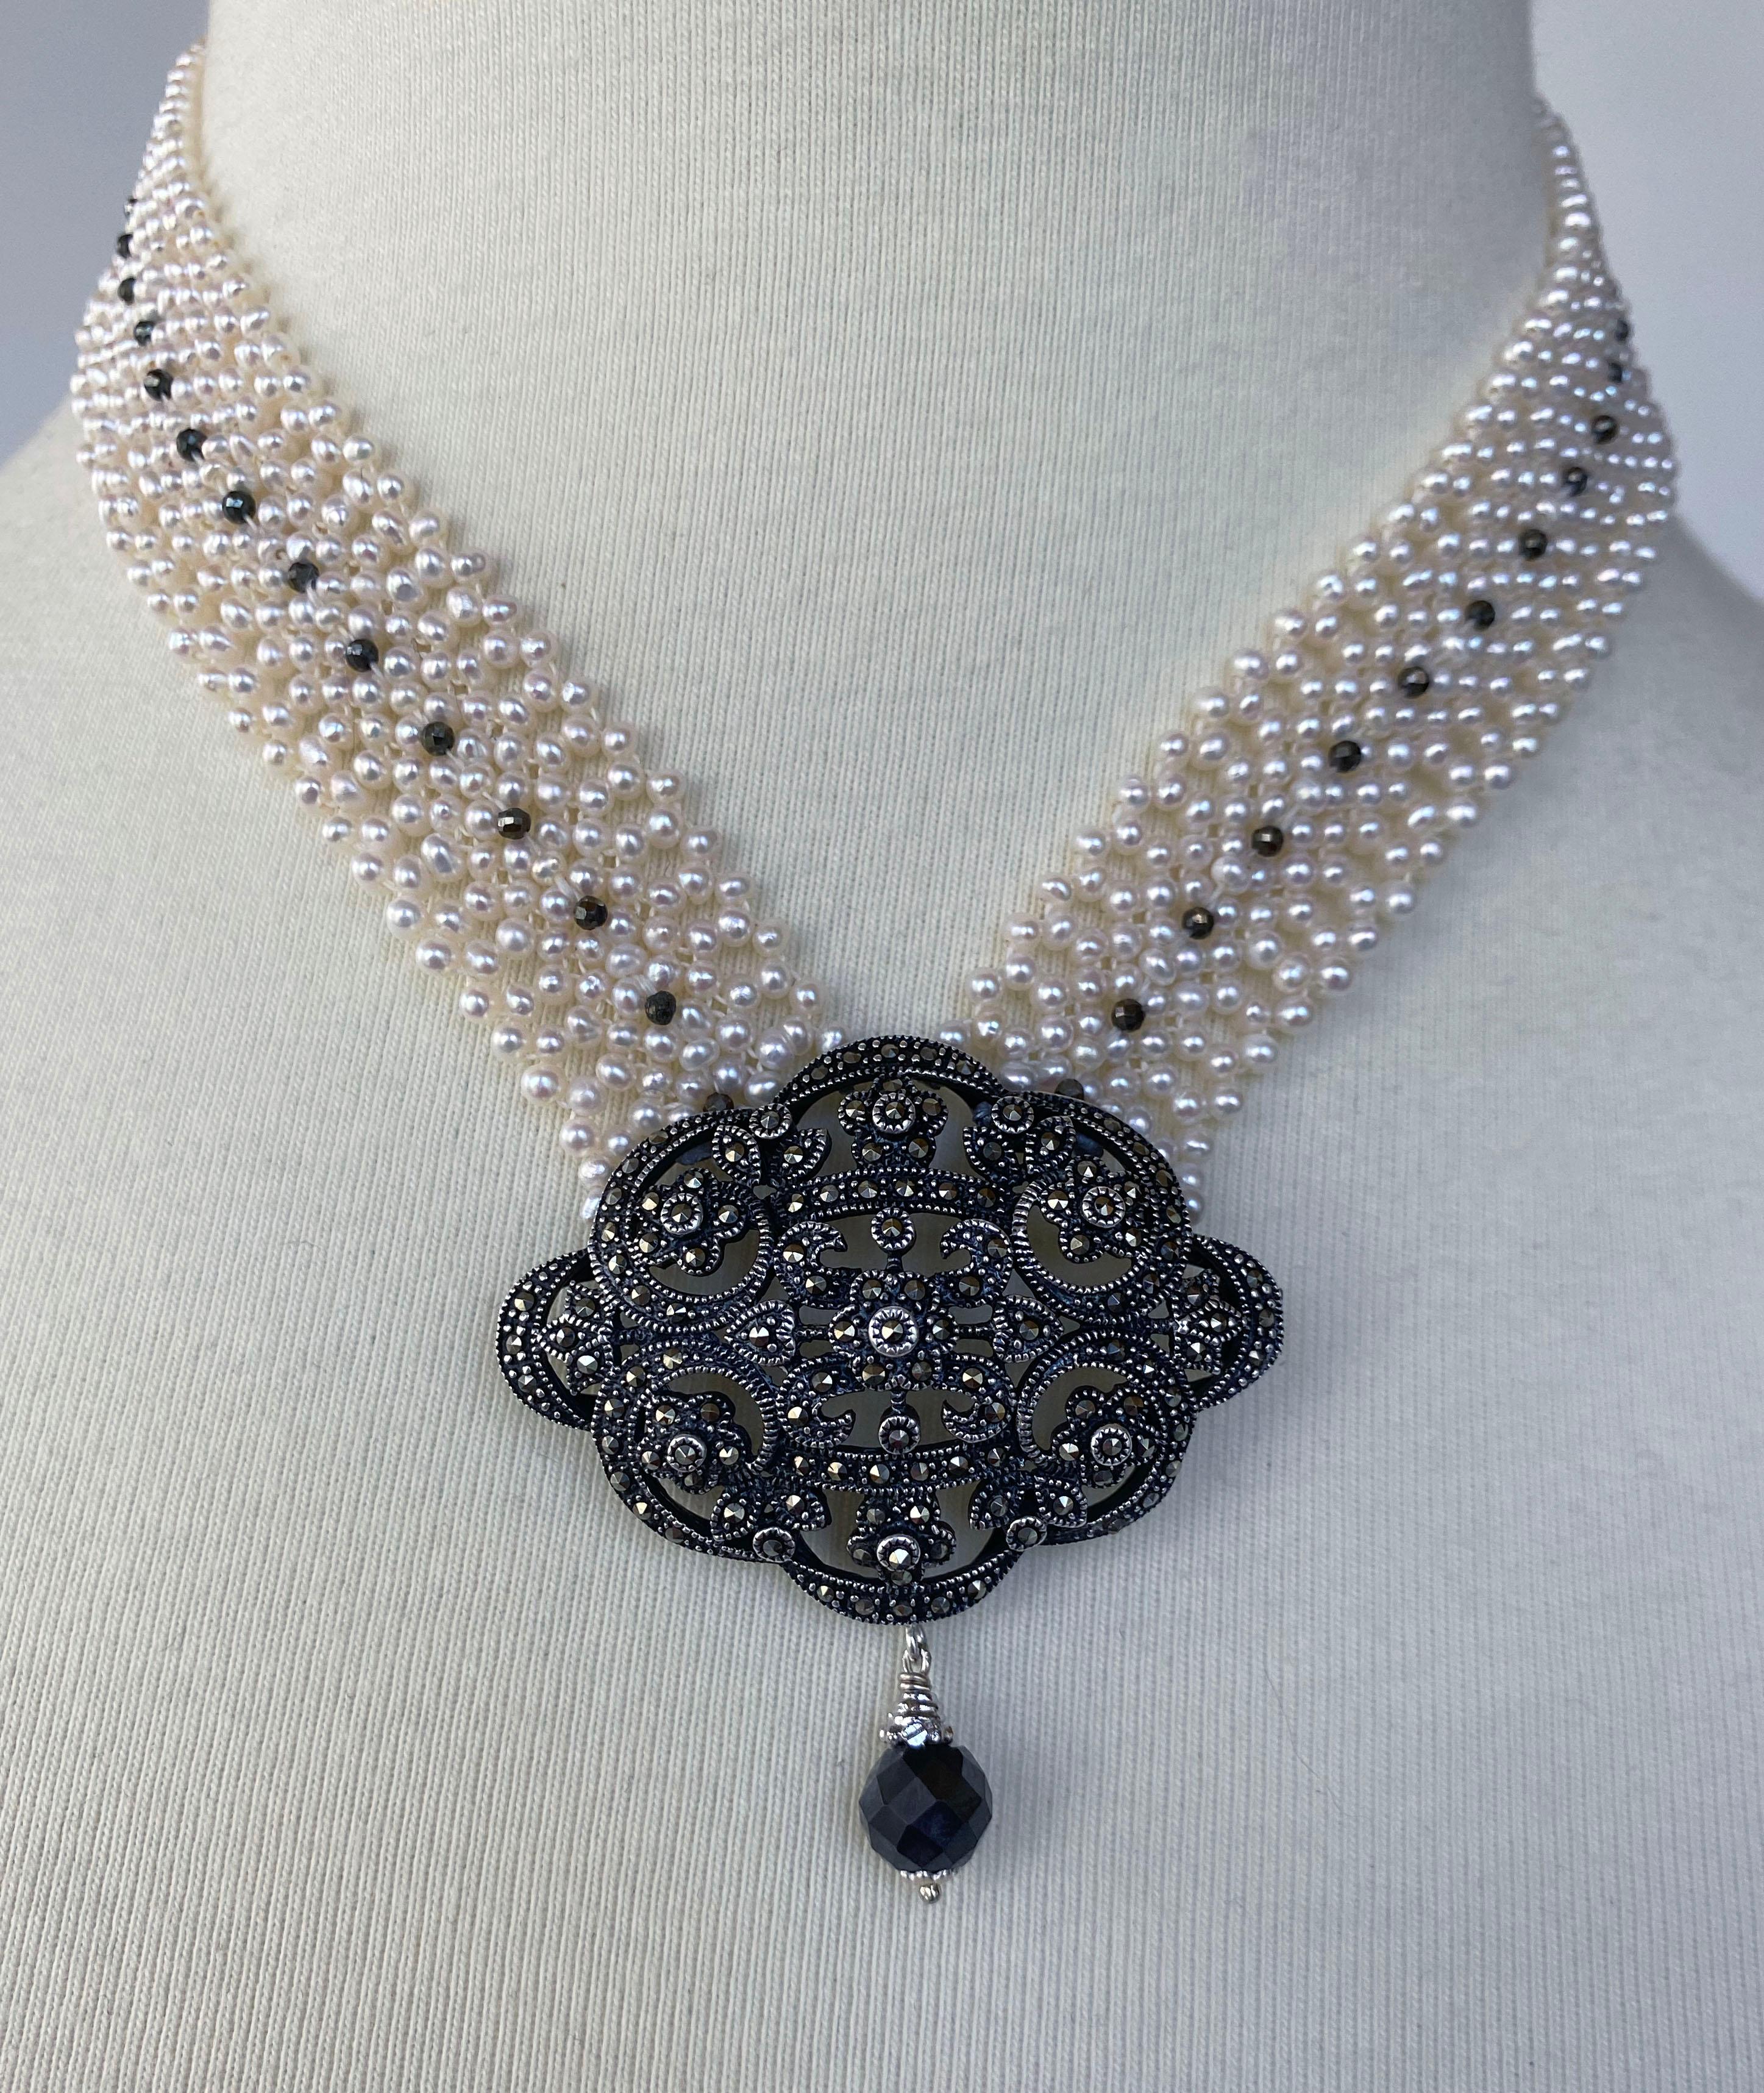 This beautifully hand crafted and woven White Pearl necklace features a Vintage Silver Brooch with Marcasite detailing within. Made with 2mm pearls, this necklace features Black Spinnel, perfectly contrasting and elevating the brooch while adding a